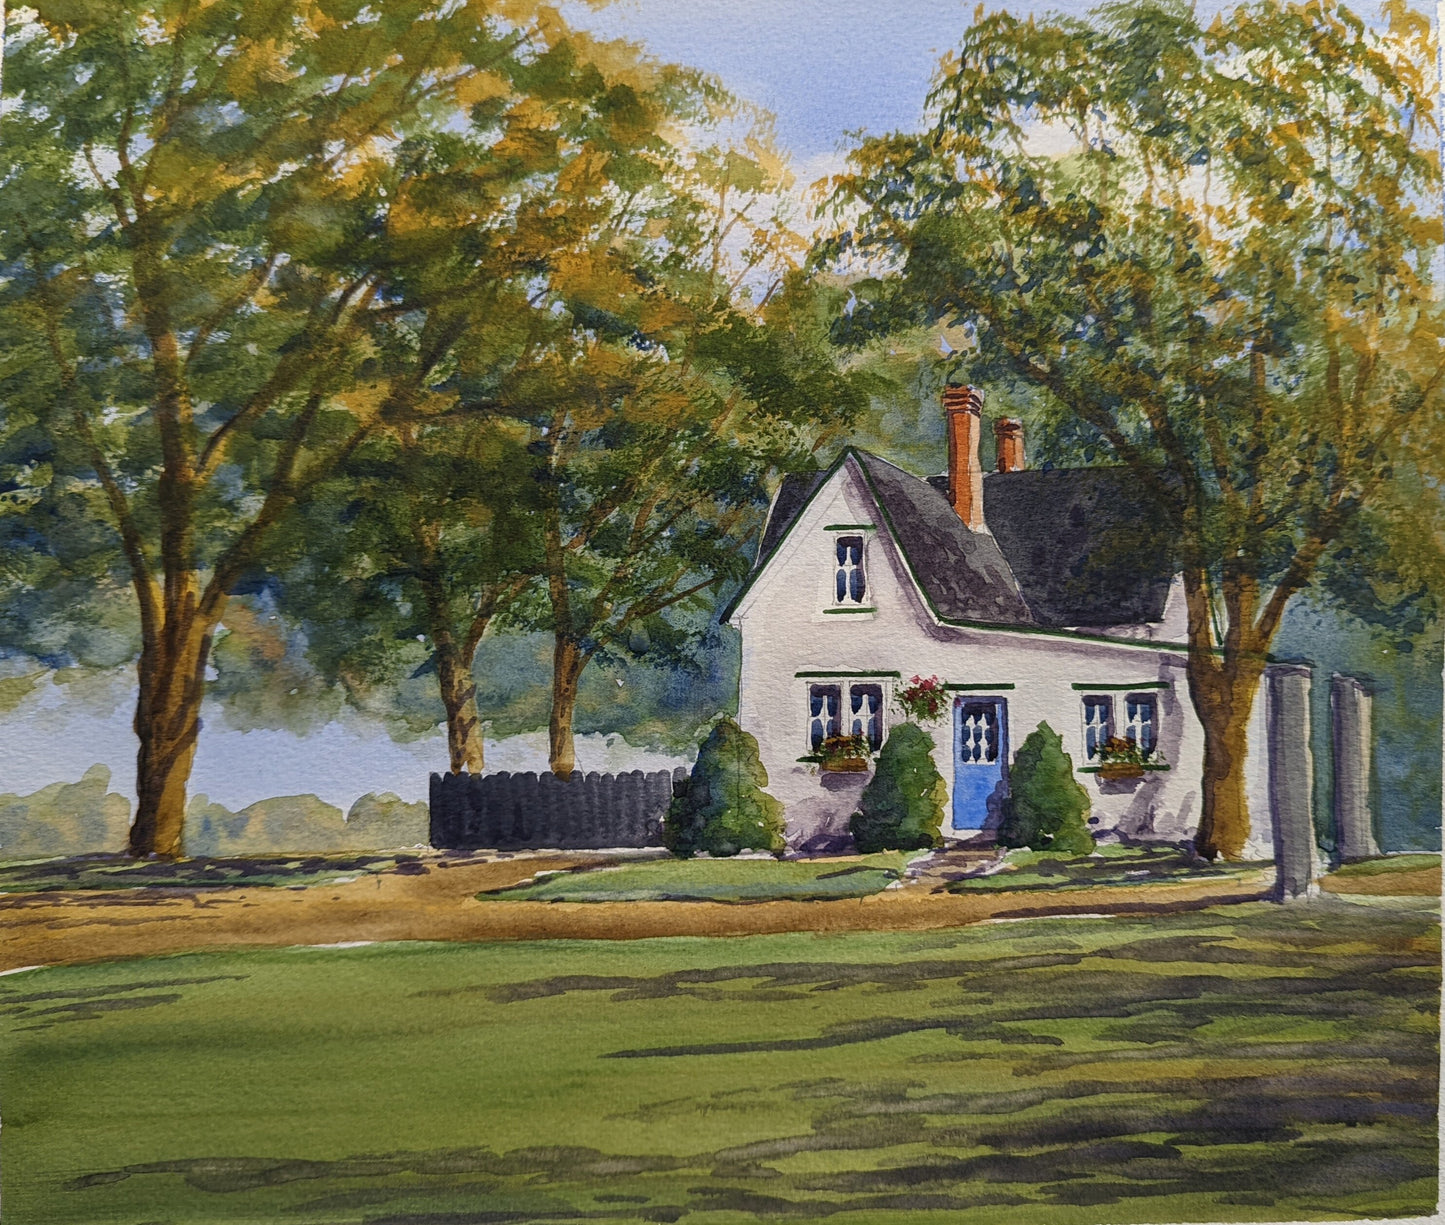 Government House Lodge, St. John's, Newfoundland (original watercolor painting)